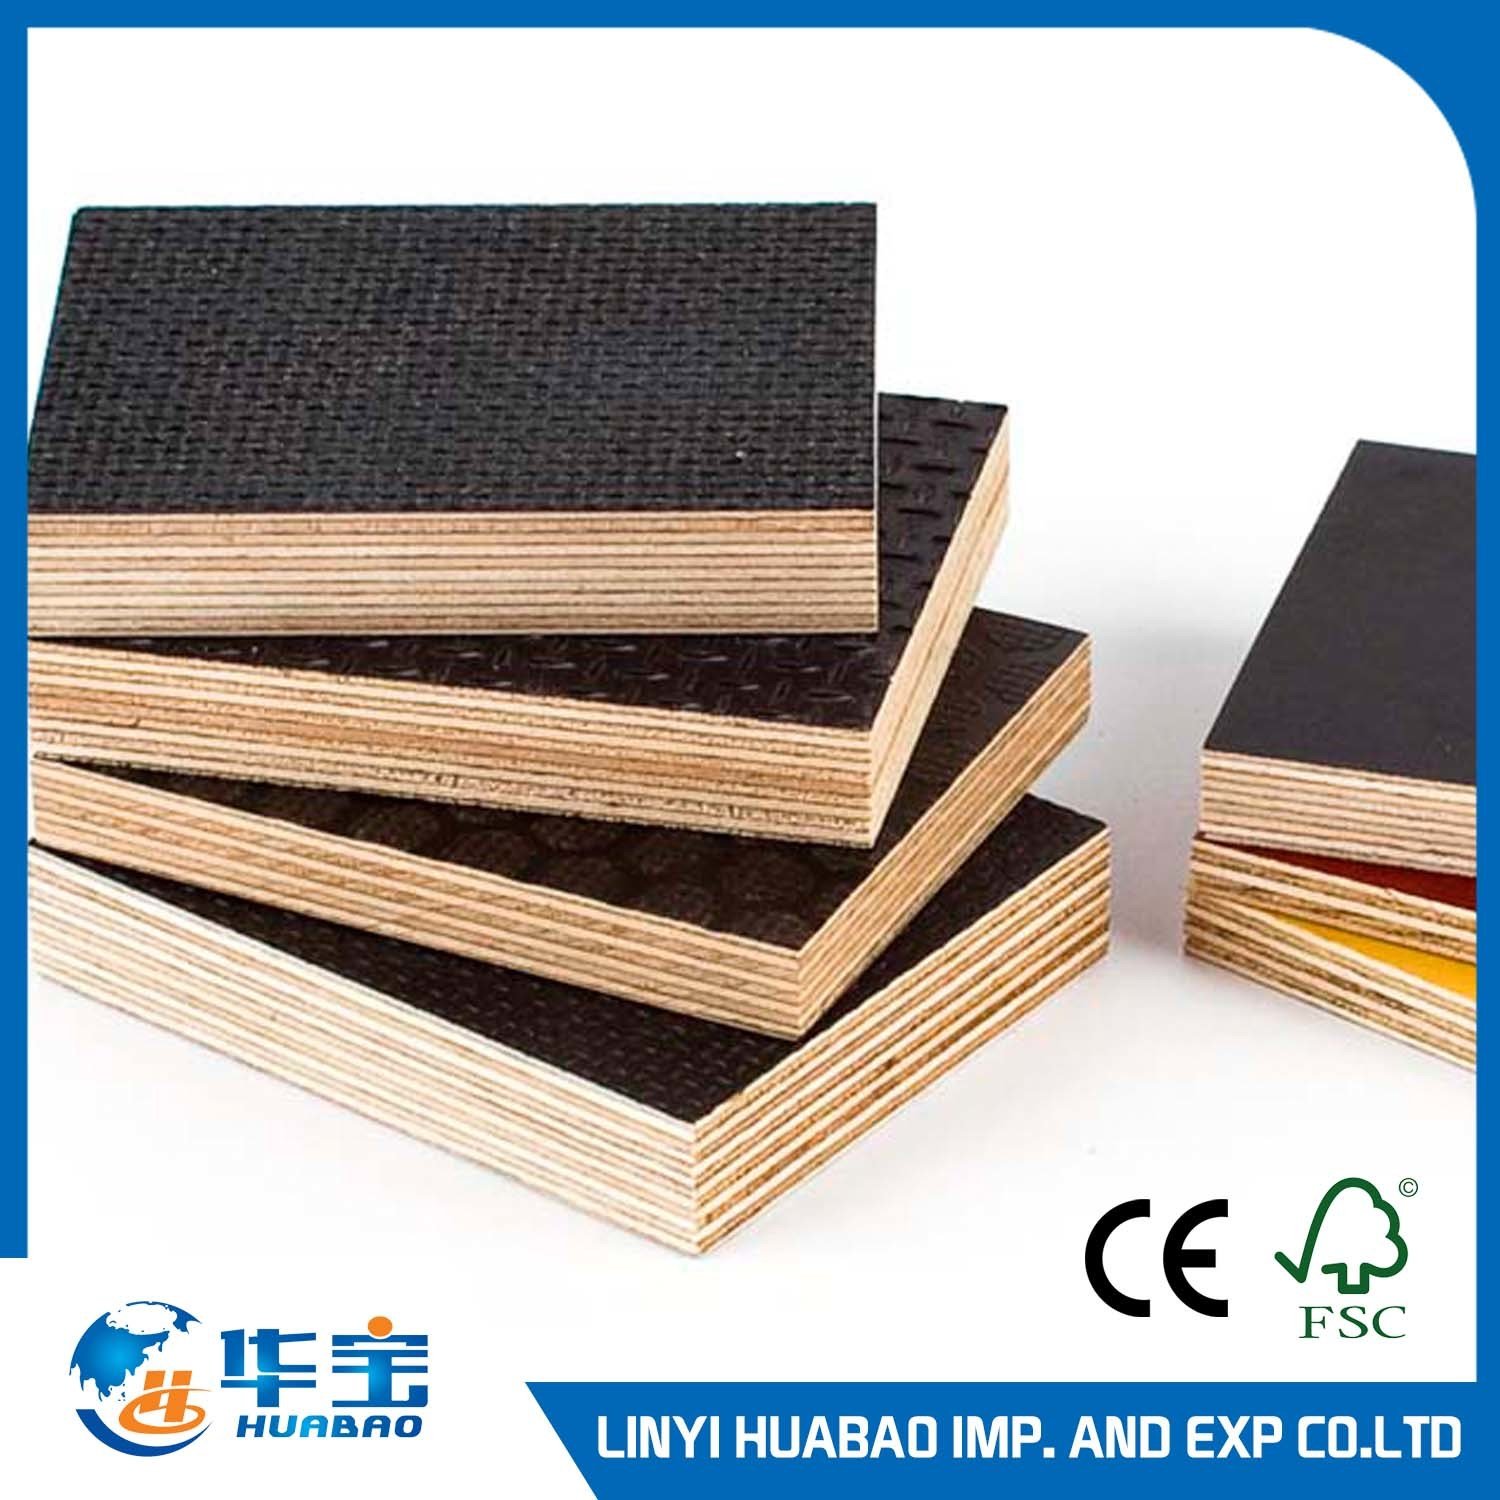 18mm Hardwood Core Plywood Sheets for Shuttering Concrete